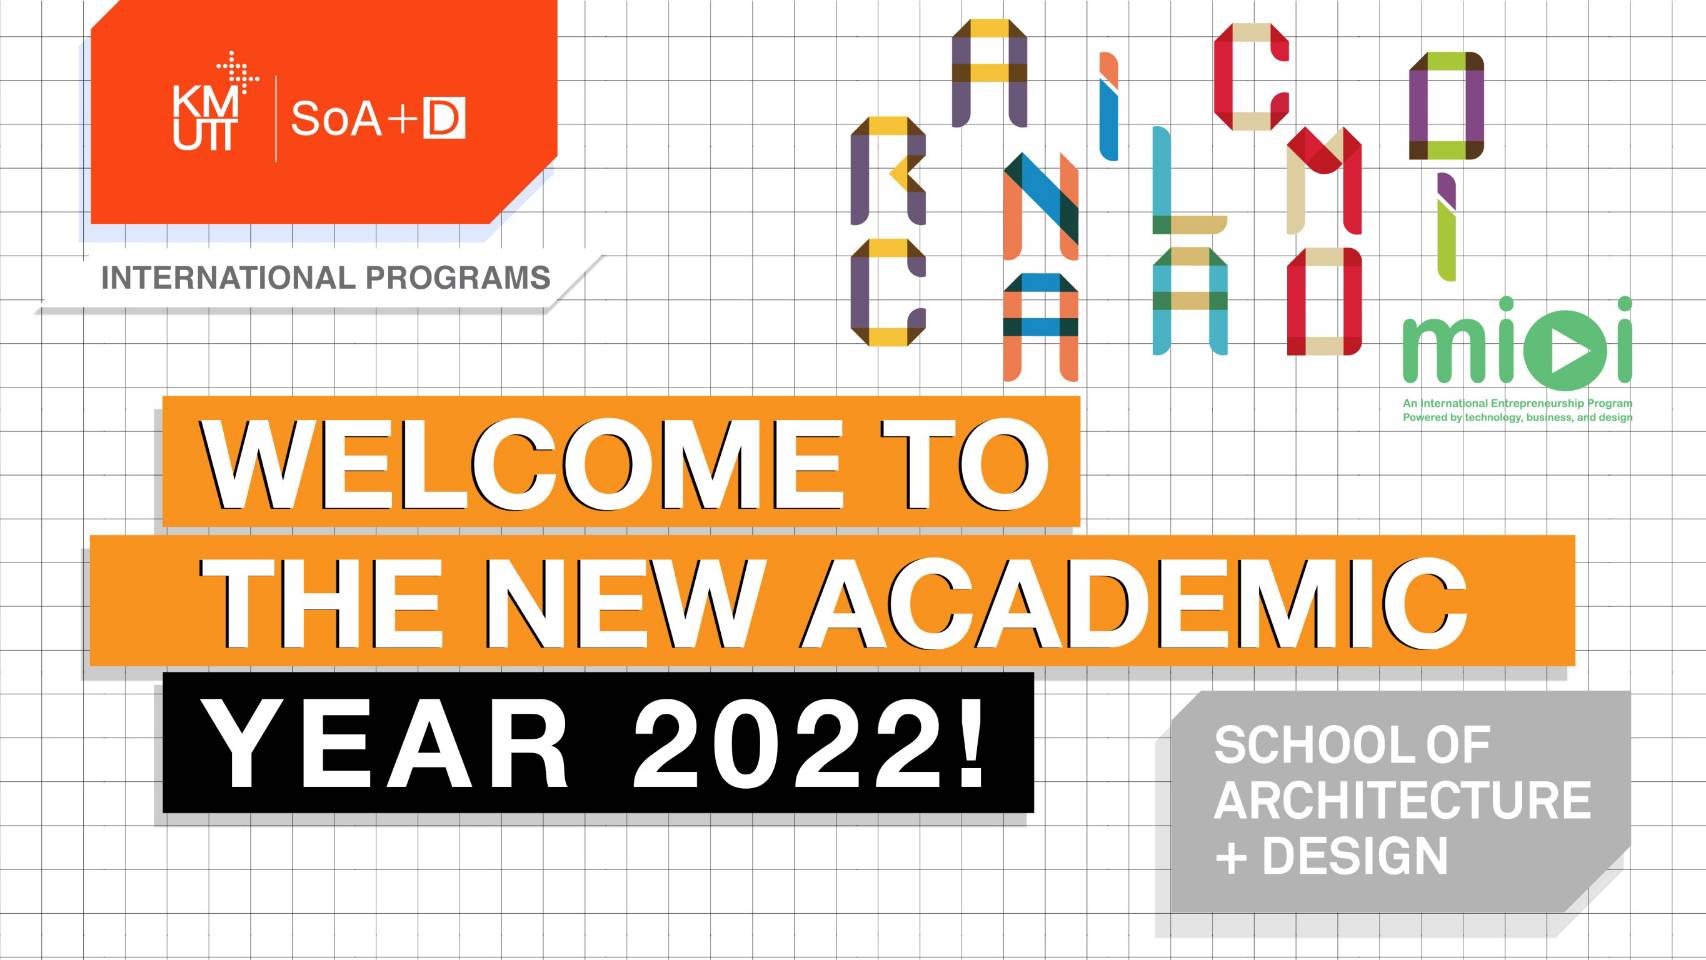 Welcome to the new academic year 2022